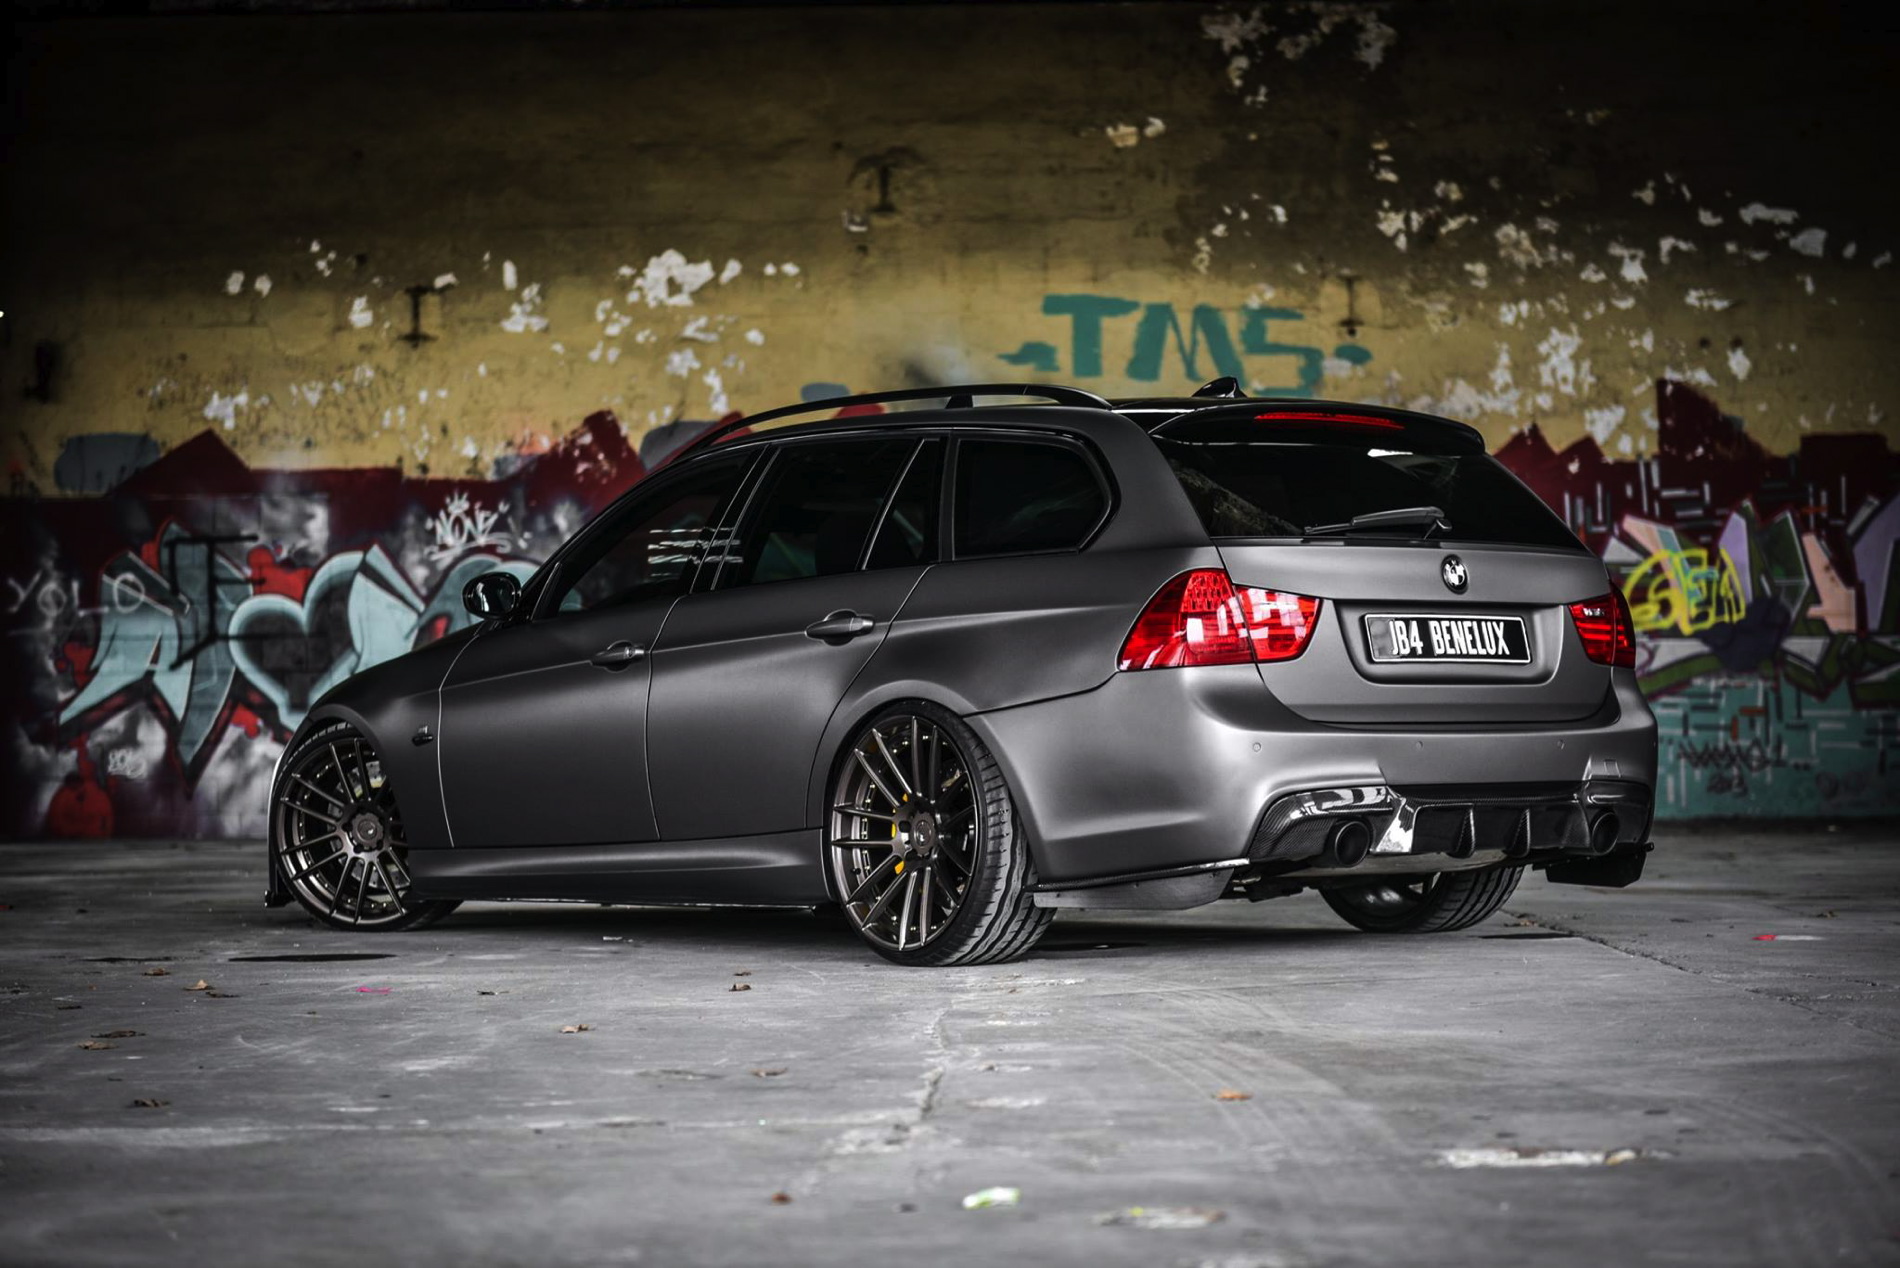 This heavily tuned BMW 335i Touring delivers 800 horsepower